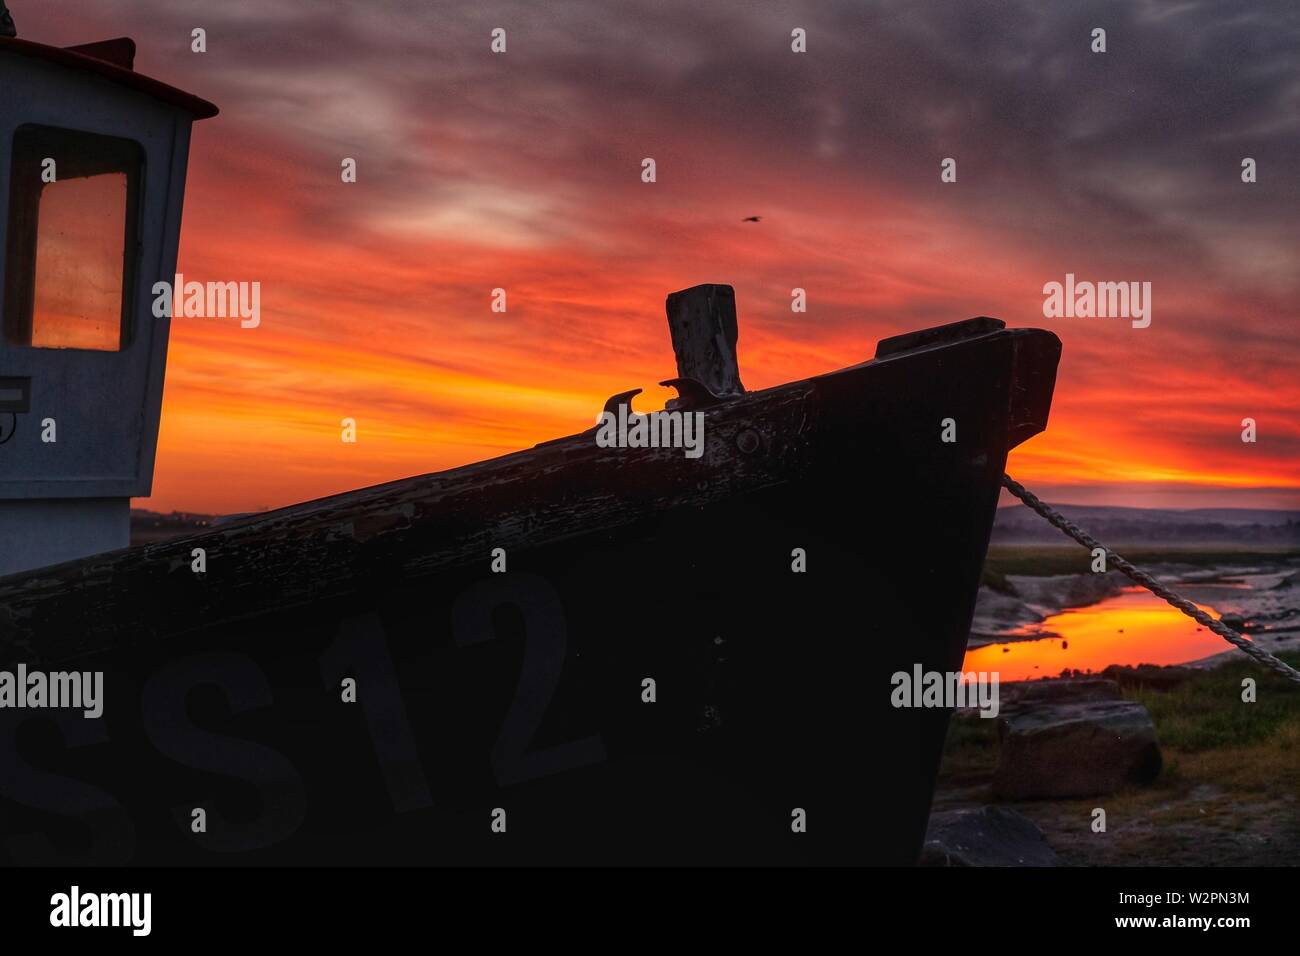 Small tugboat silhouetted against a fiery sky at sunrise, on the river bank Stock Photo